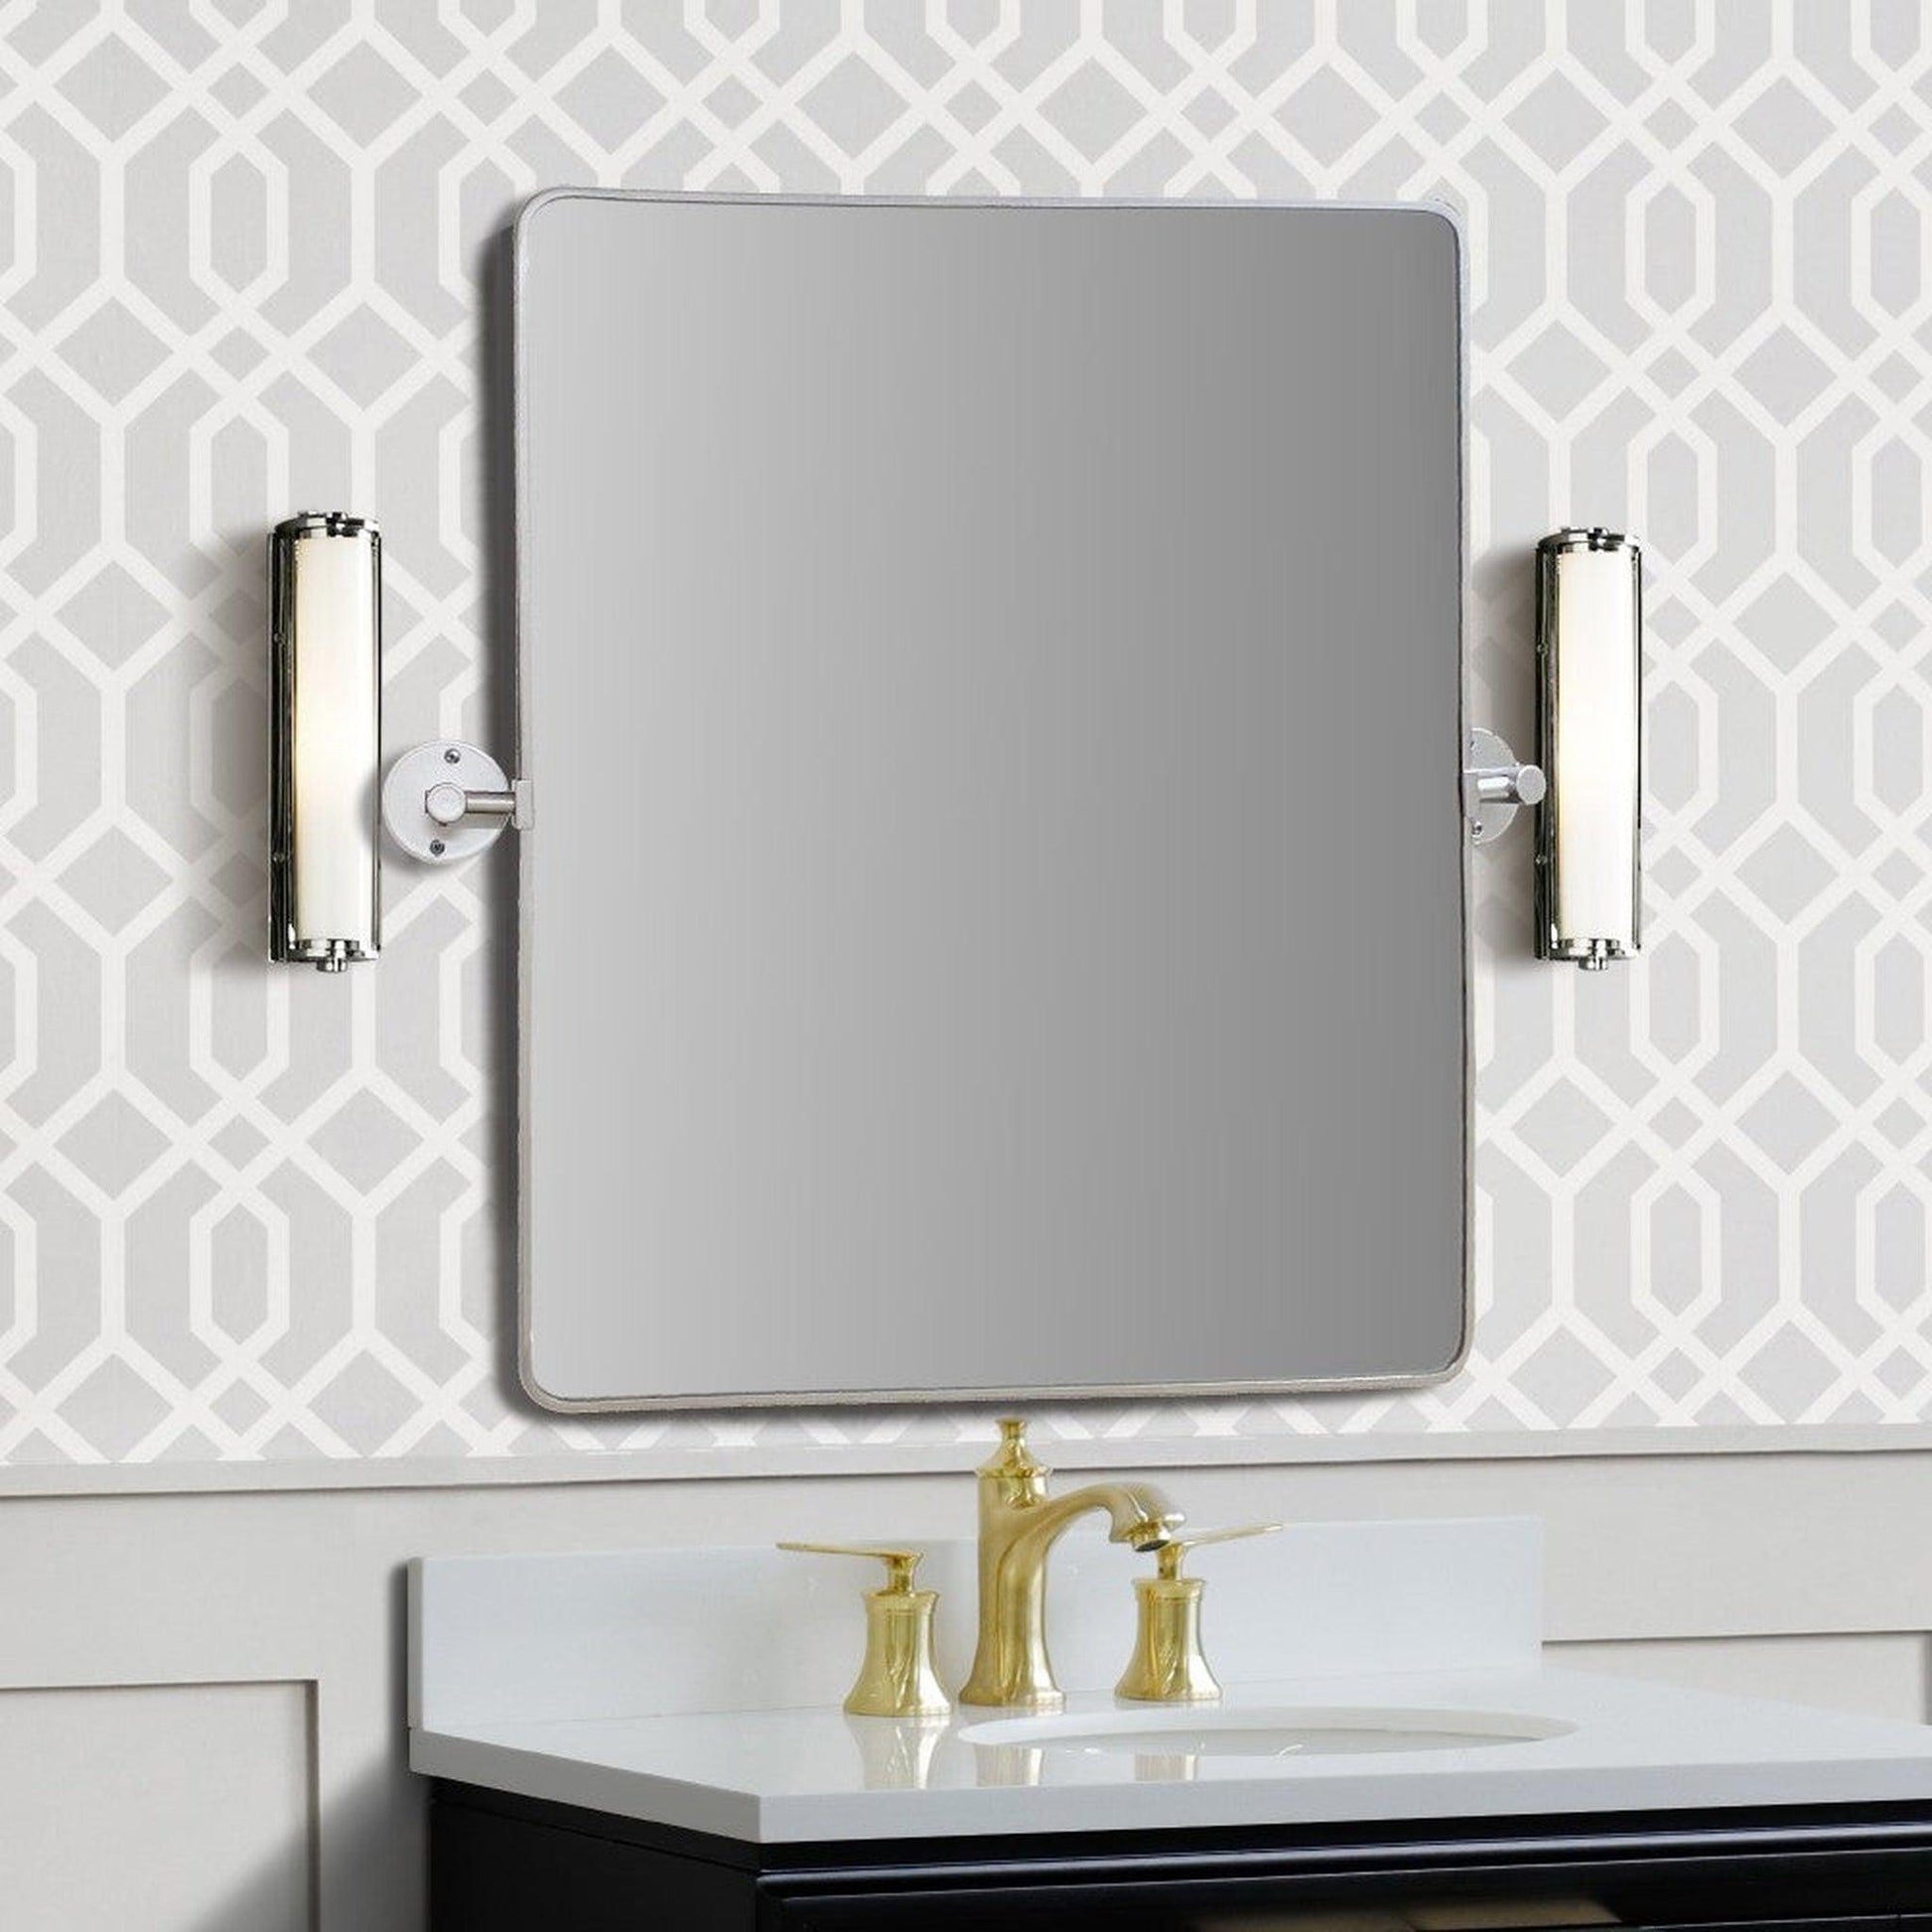 Bellaterra Home 28" x 30" Silver Rectangle Wall-Mounted Steel Framed Mirror With Bracket Support